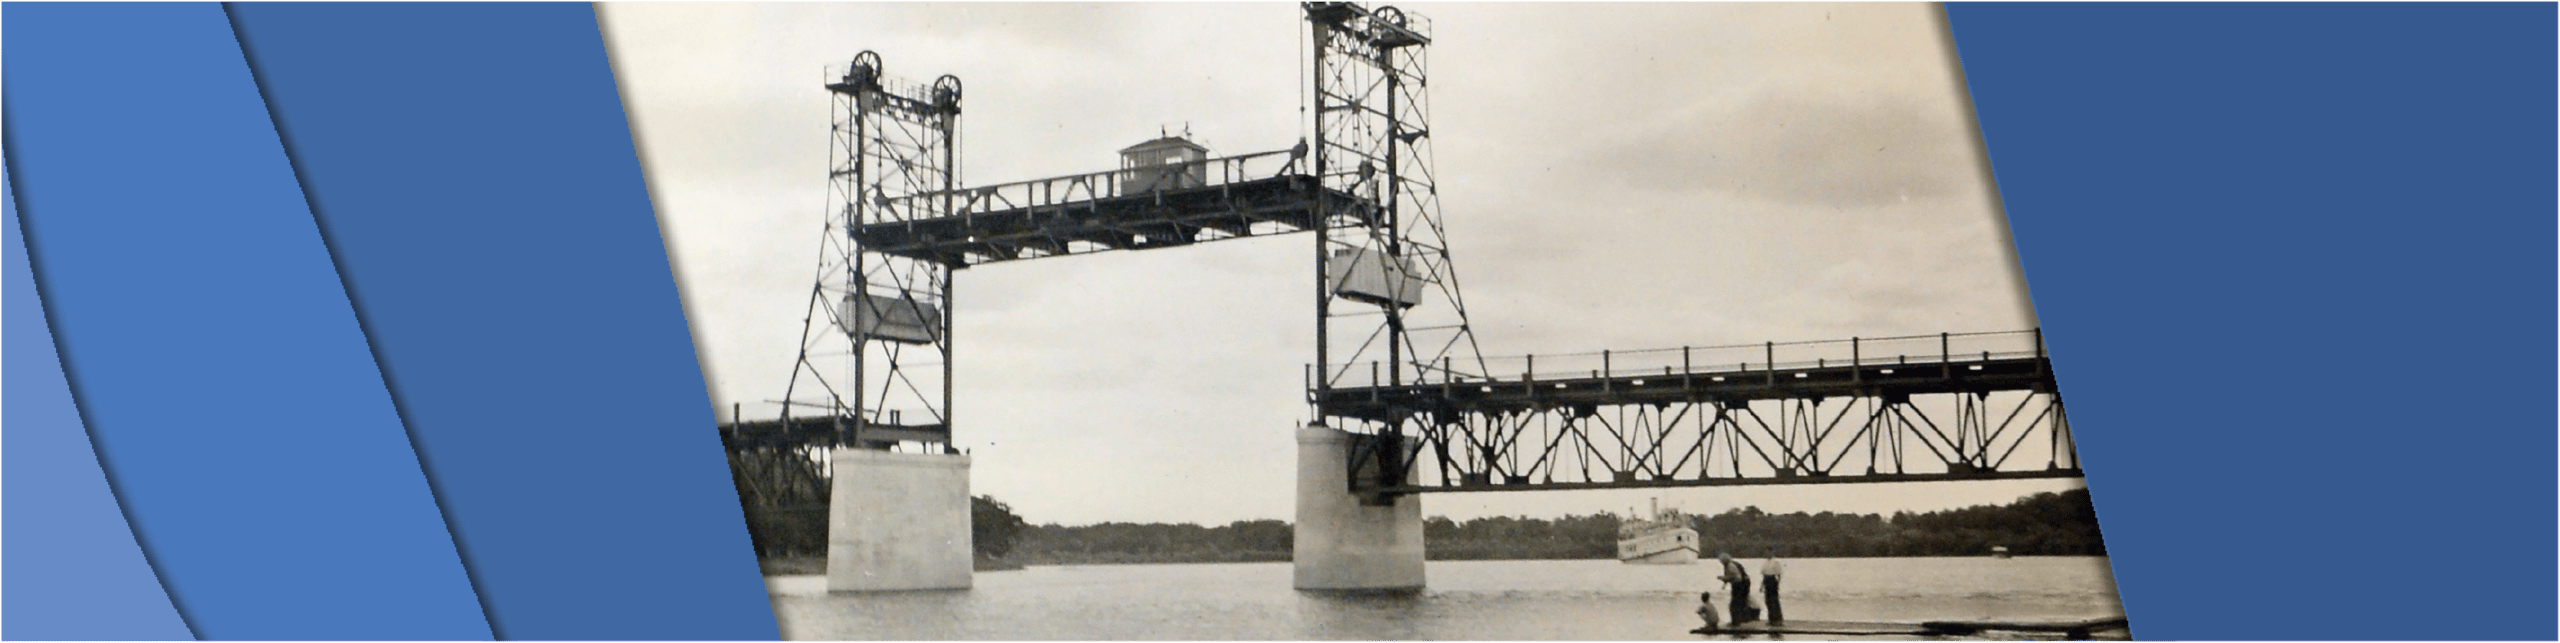 Photo showing the bridge lifted as a boat is approaching in the distance.